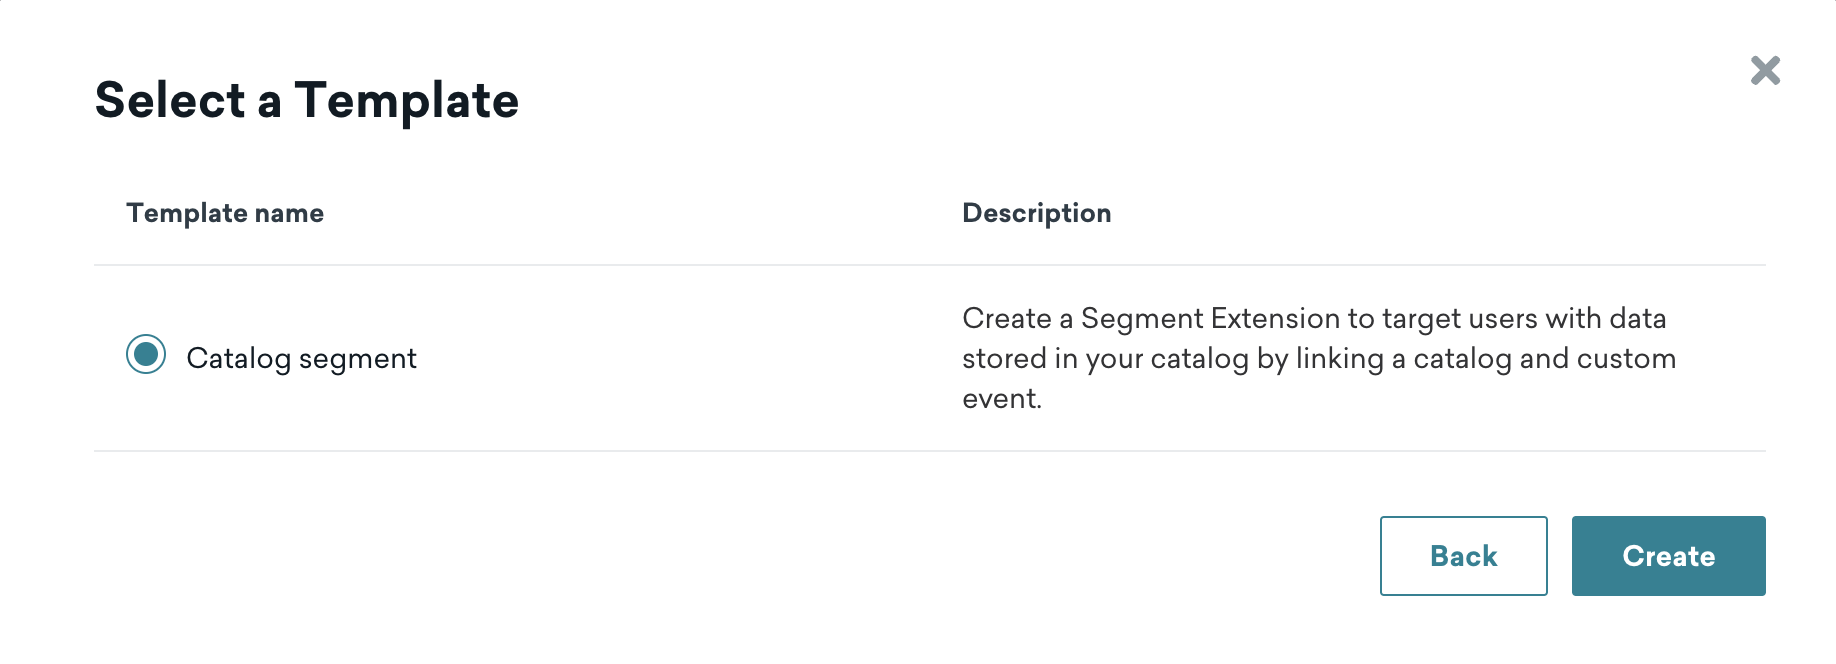 Modal with "Catalog segment" selected as the template to create.